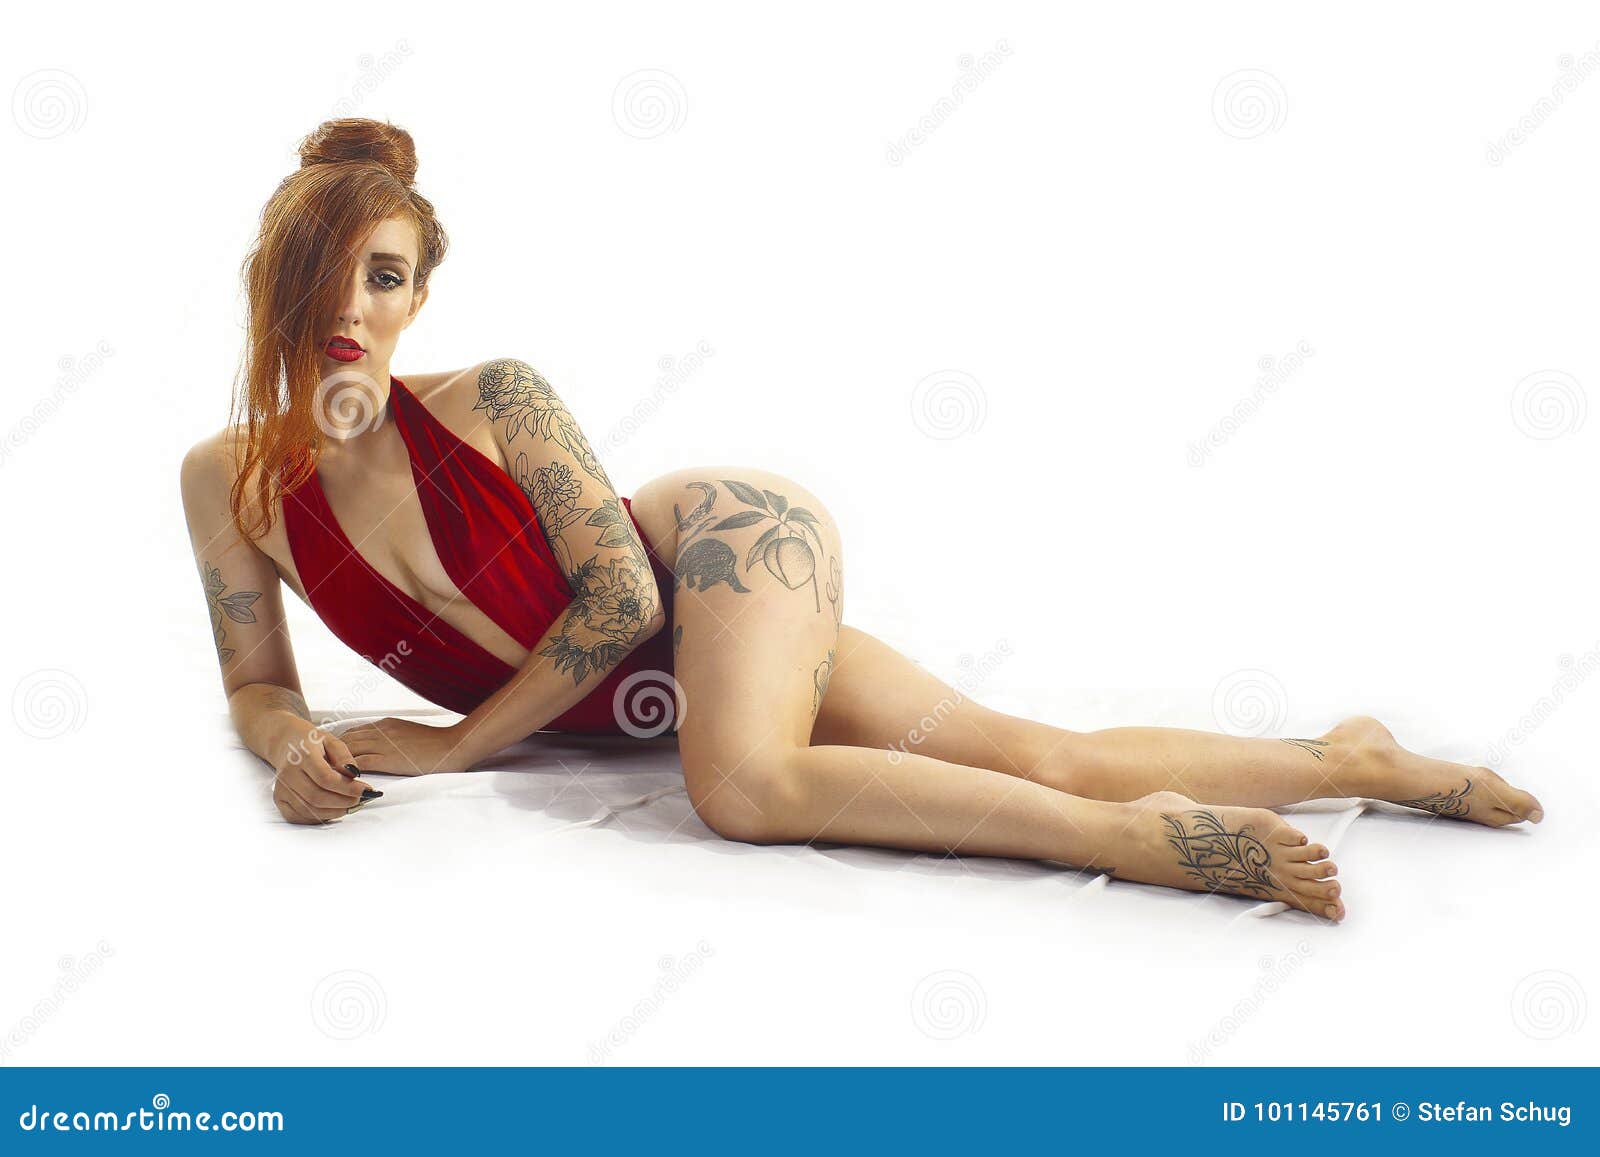 Tattoed Redhead Stock Image Image Of Stretched Dress 101145761